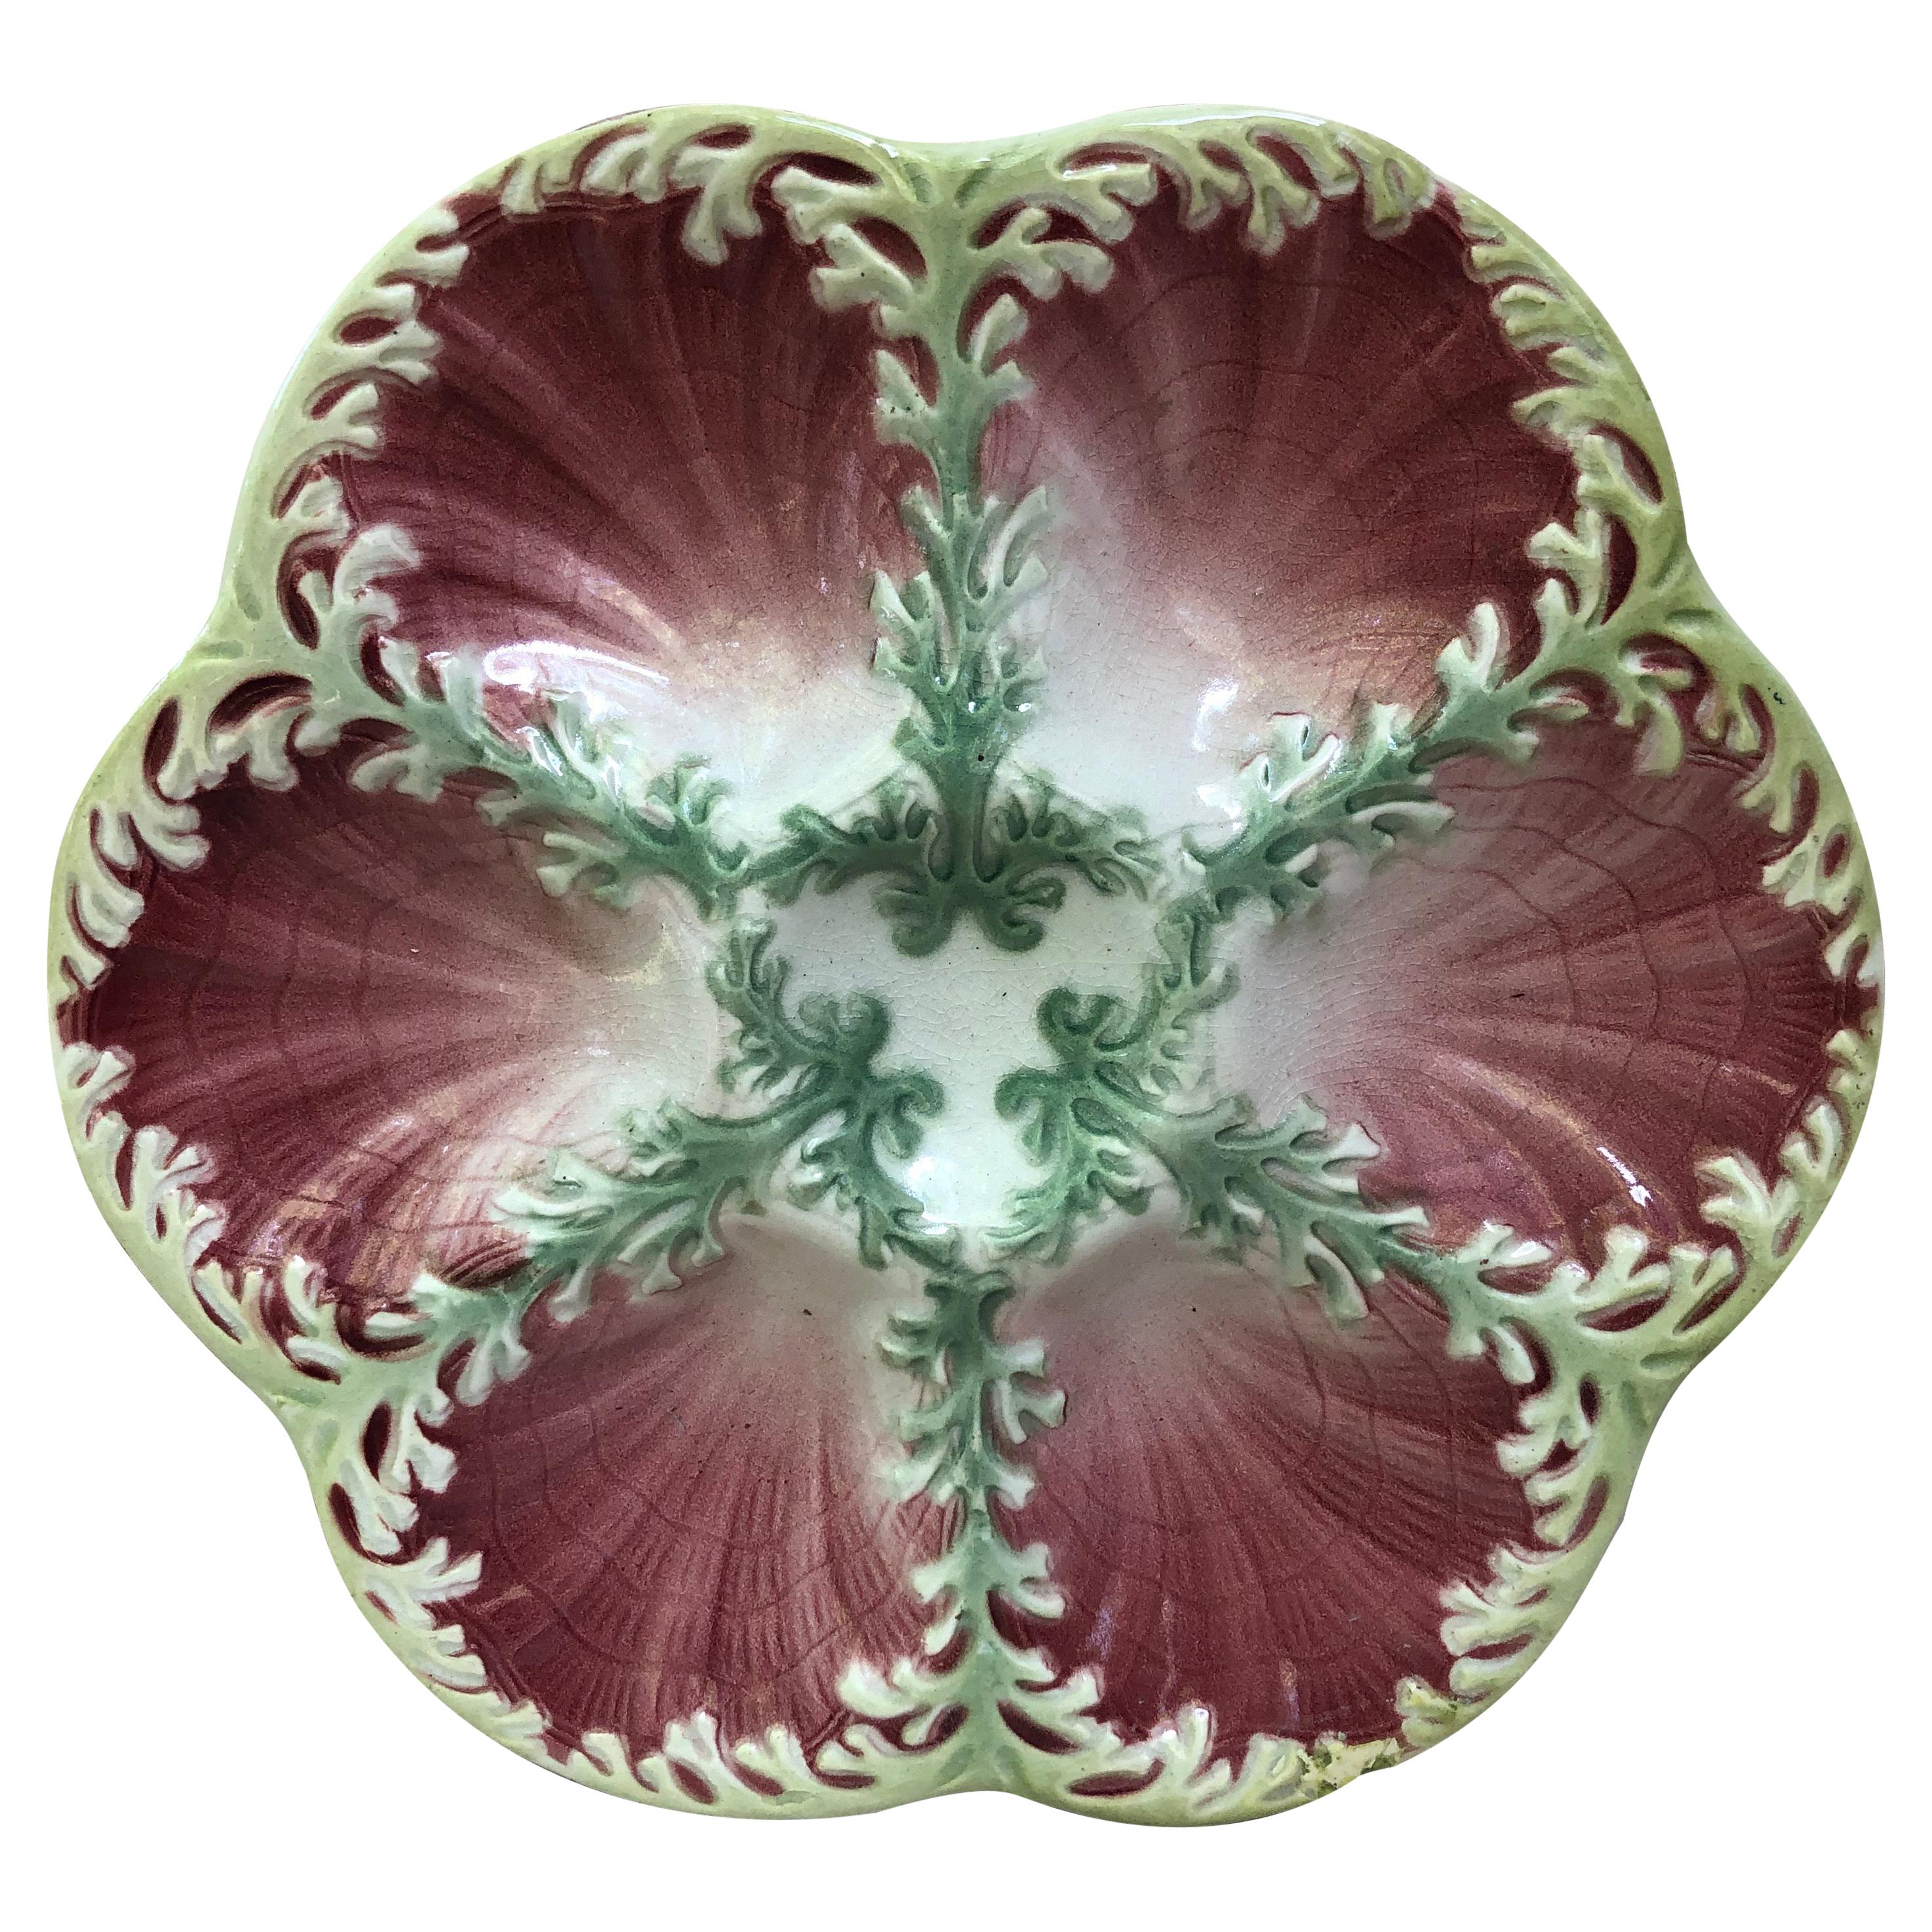 Majolica Seaweeds Oyster Plate Keller and Guerin Saint Clement, circa 1890